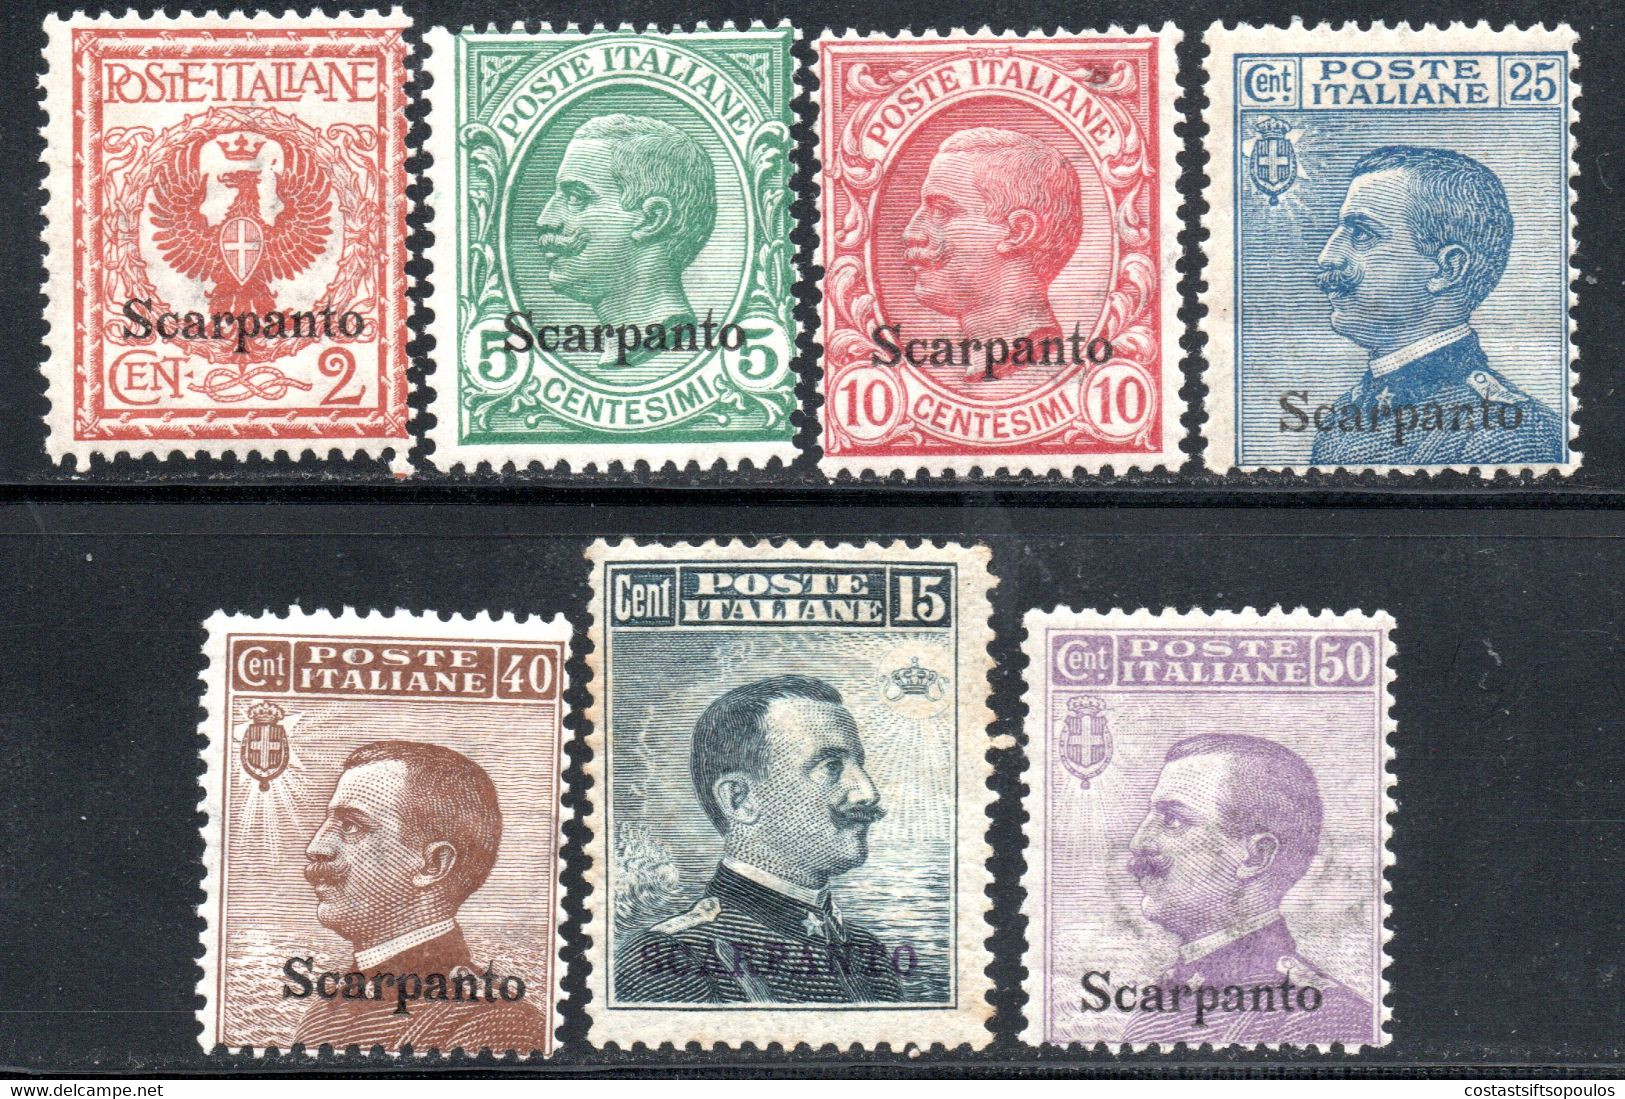 720.GREECE.ITALY,DODECANESE,SCARPANTO,KARPATHOS,1912 #3-9 MLH/MNH(MOSTLY) - Dodecanese